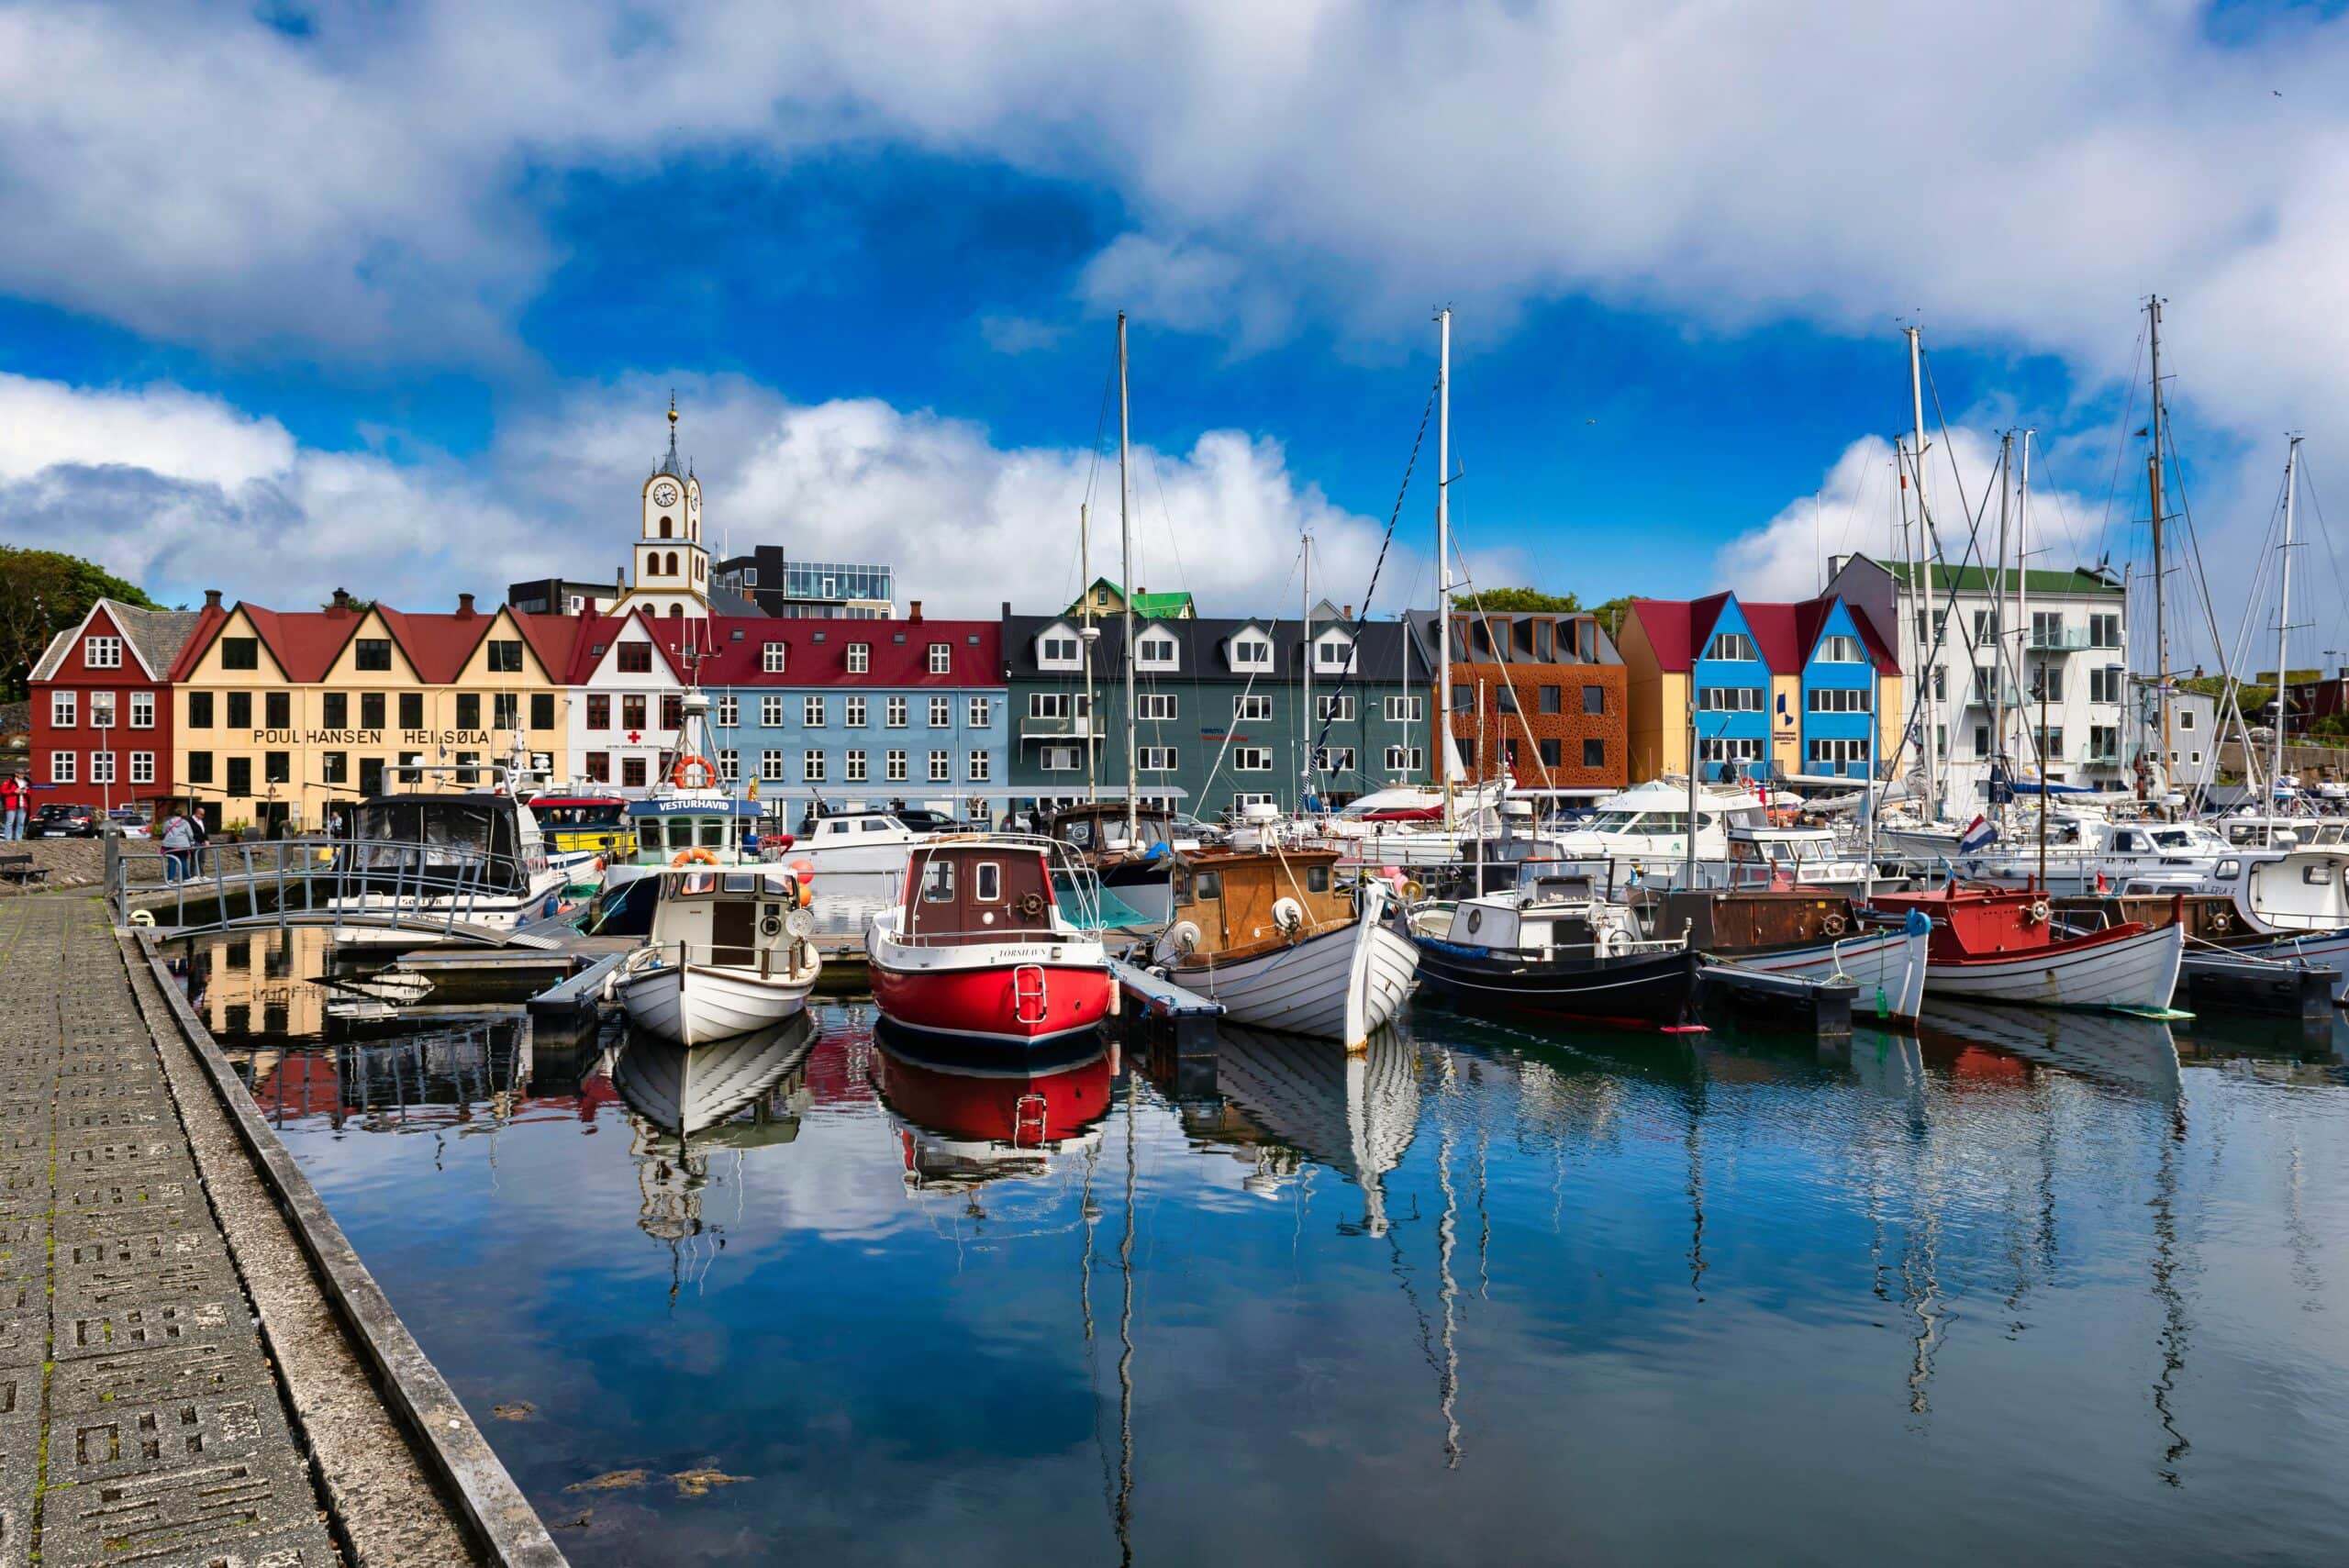 A view of the Faroe Islands capital Tórshavn, situated in the North Atlantic Ocean